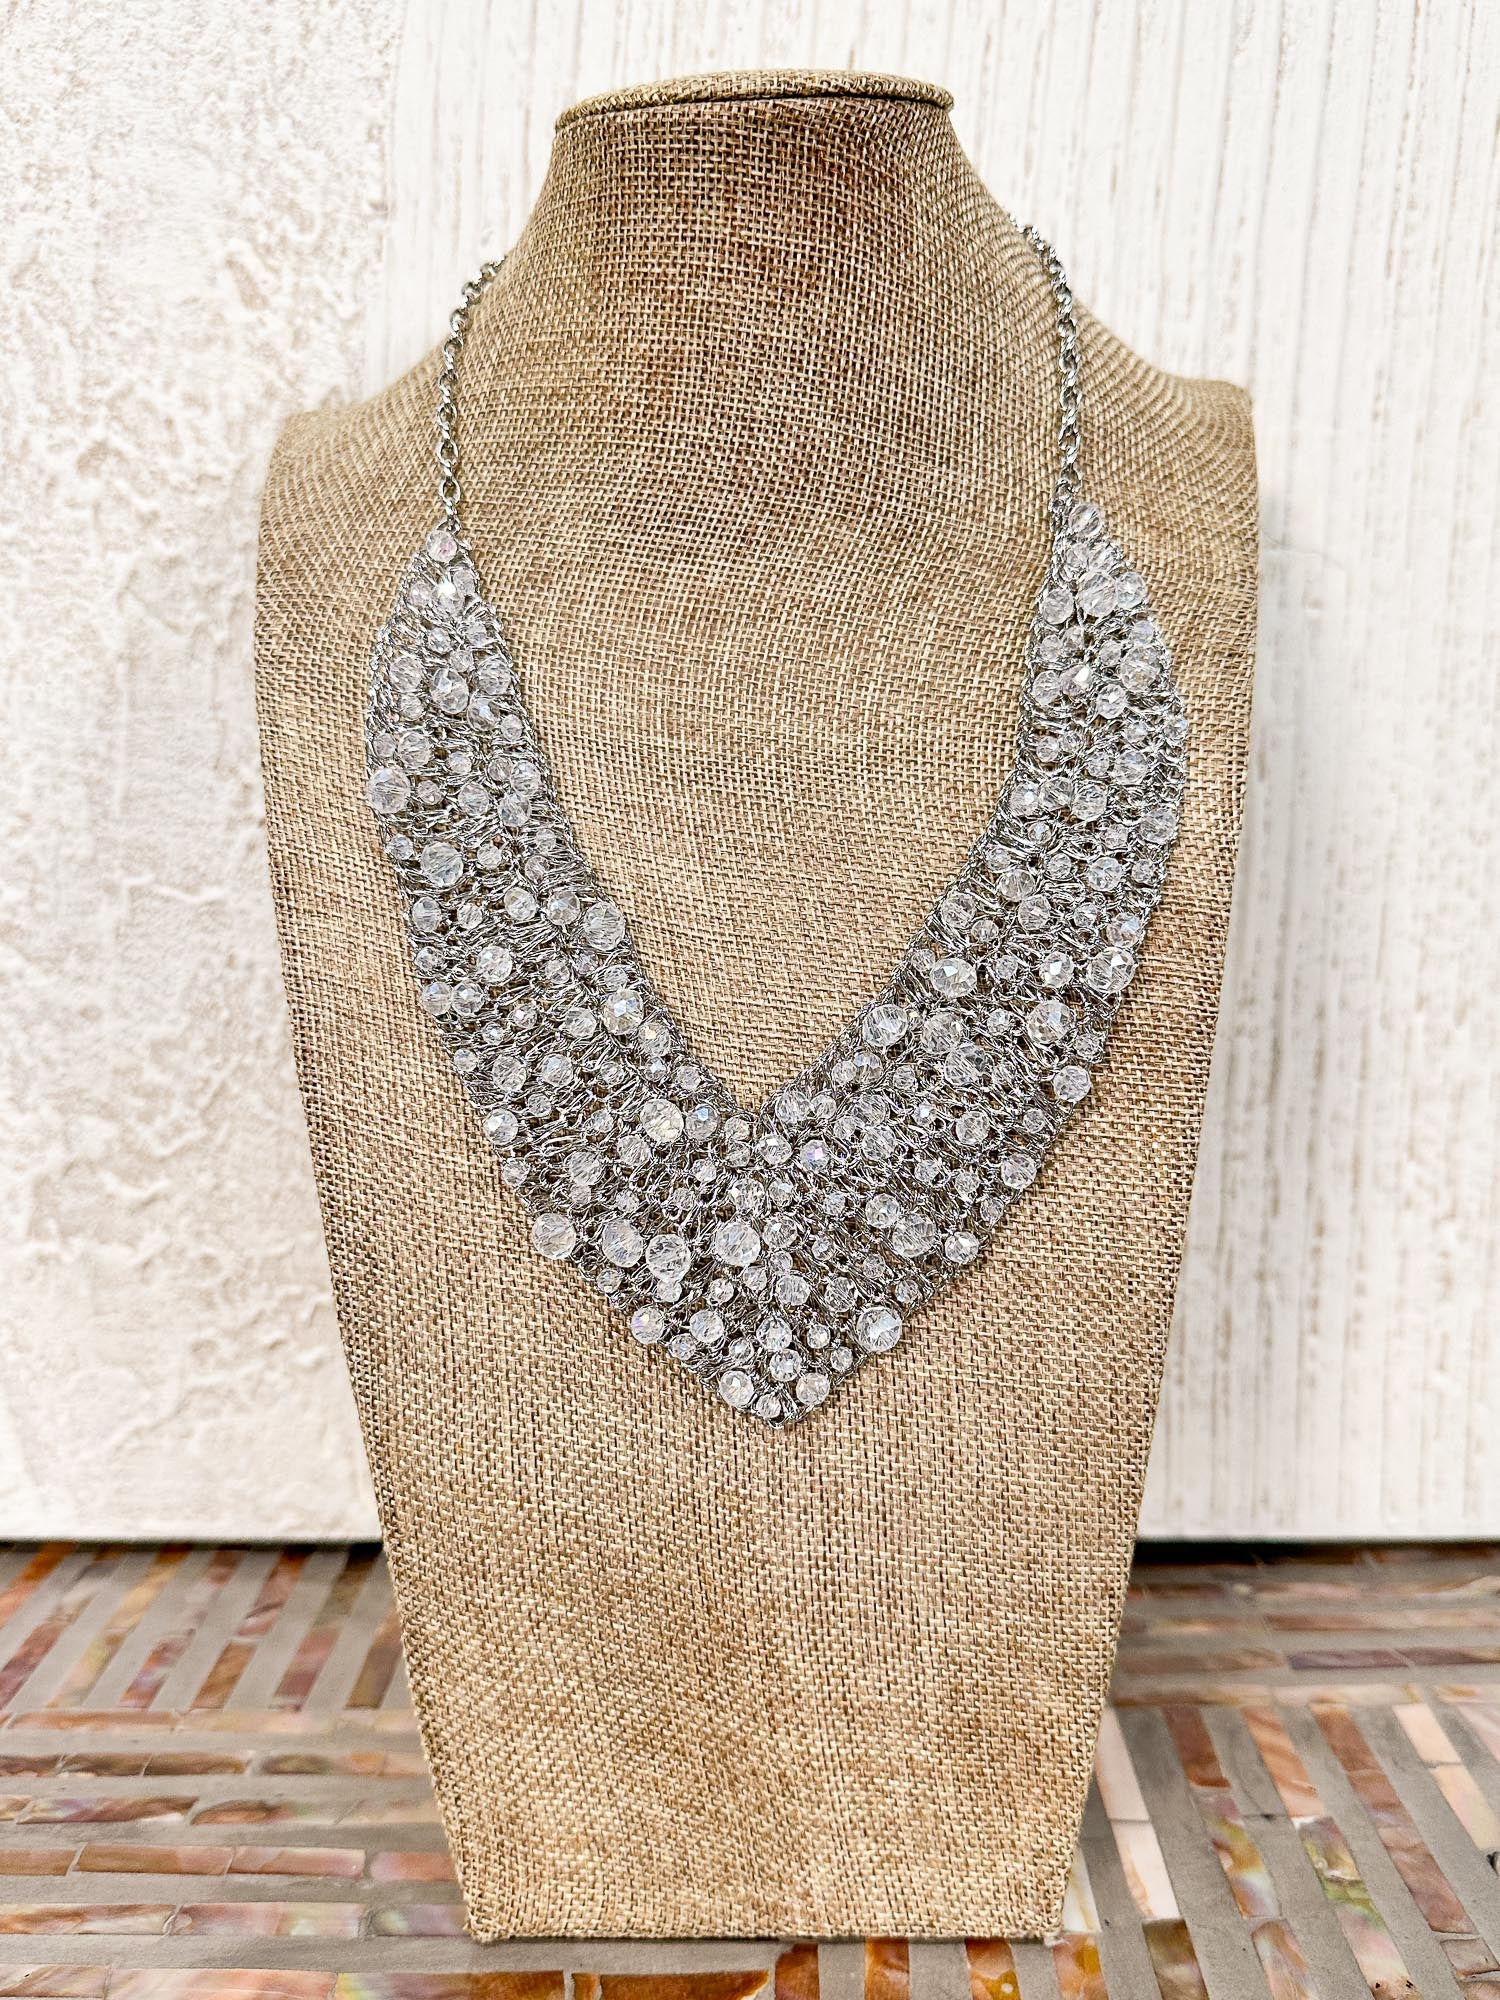 Lavish by Tricia Milaneze Crystal Necklace, Silver Iridescent - Statement Boutique